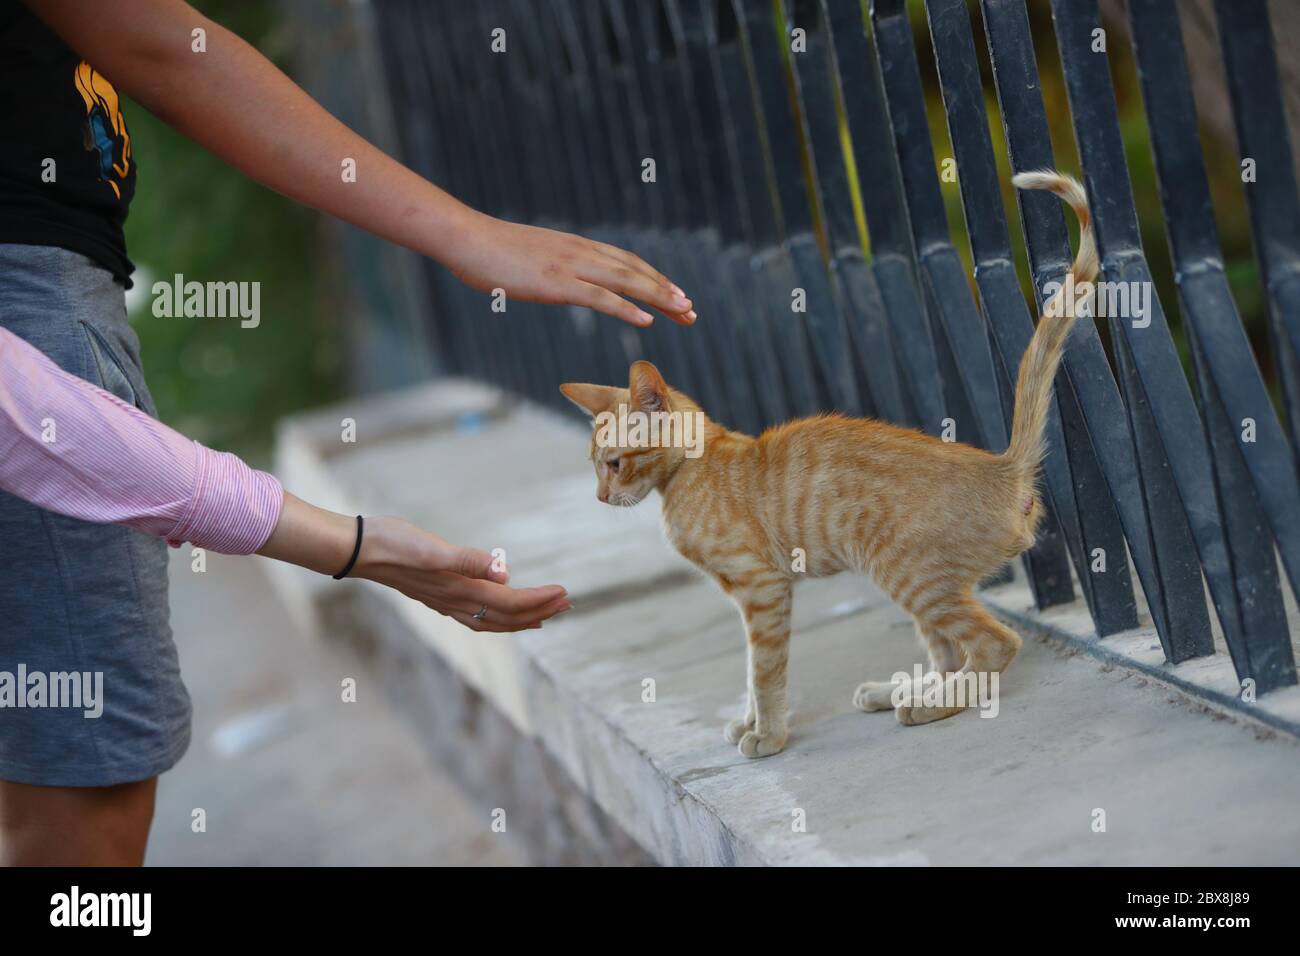 Cairo. 1st June, 2020. People play with a cat on a street in Cairo, Egypt  on June 1, 2020. Fears that pets can transmit COVID-19 virus have led many  owners to abandon